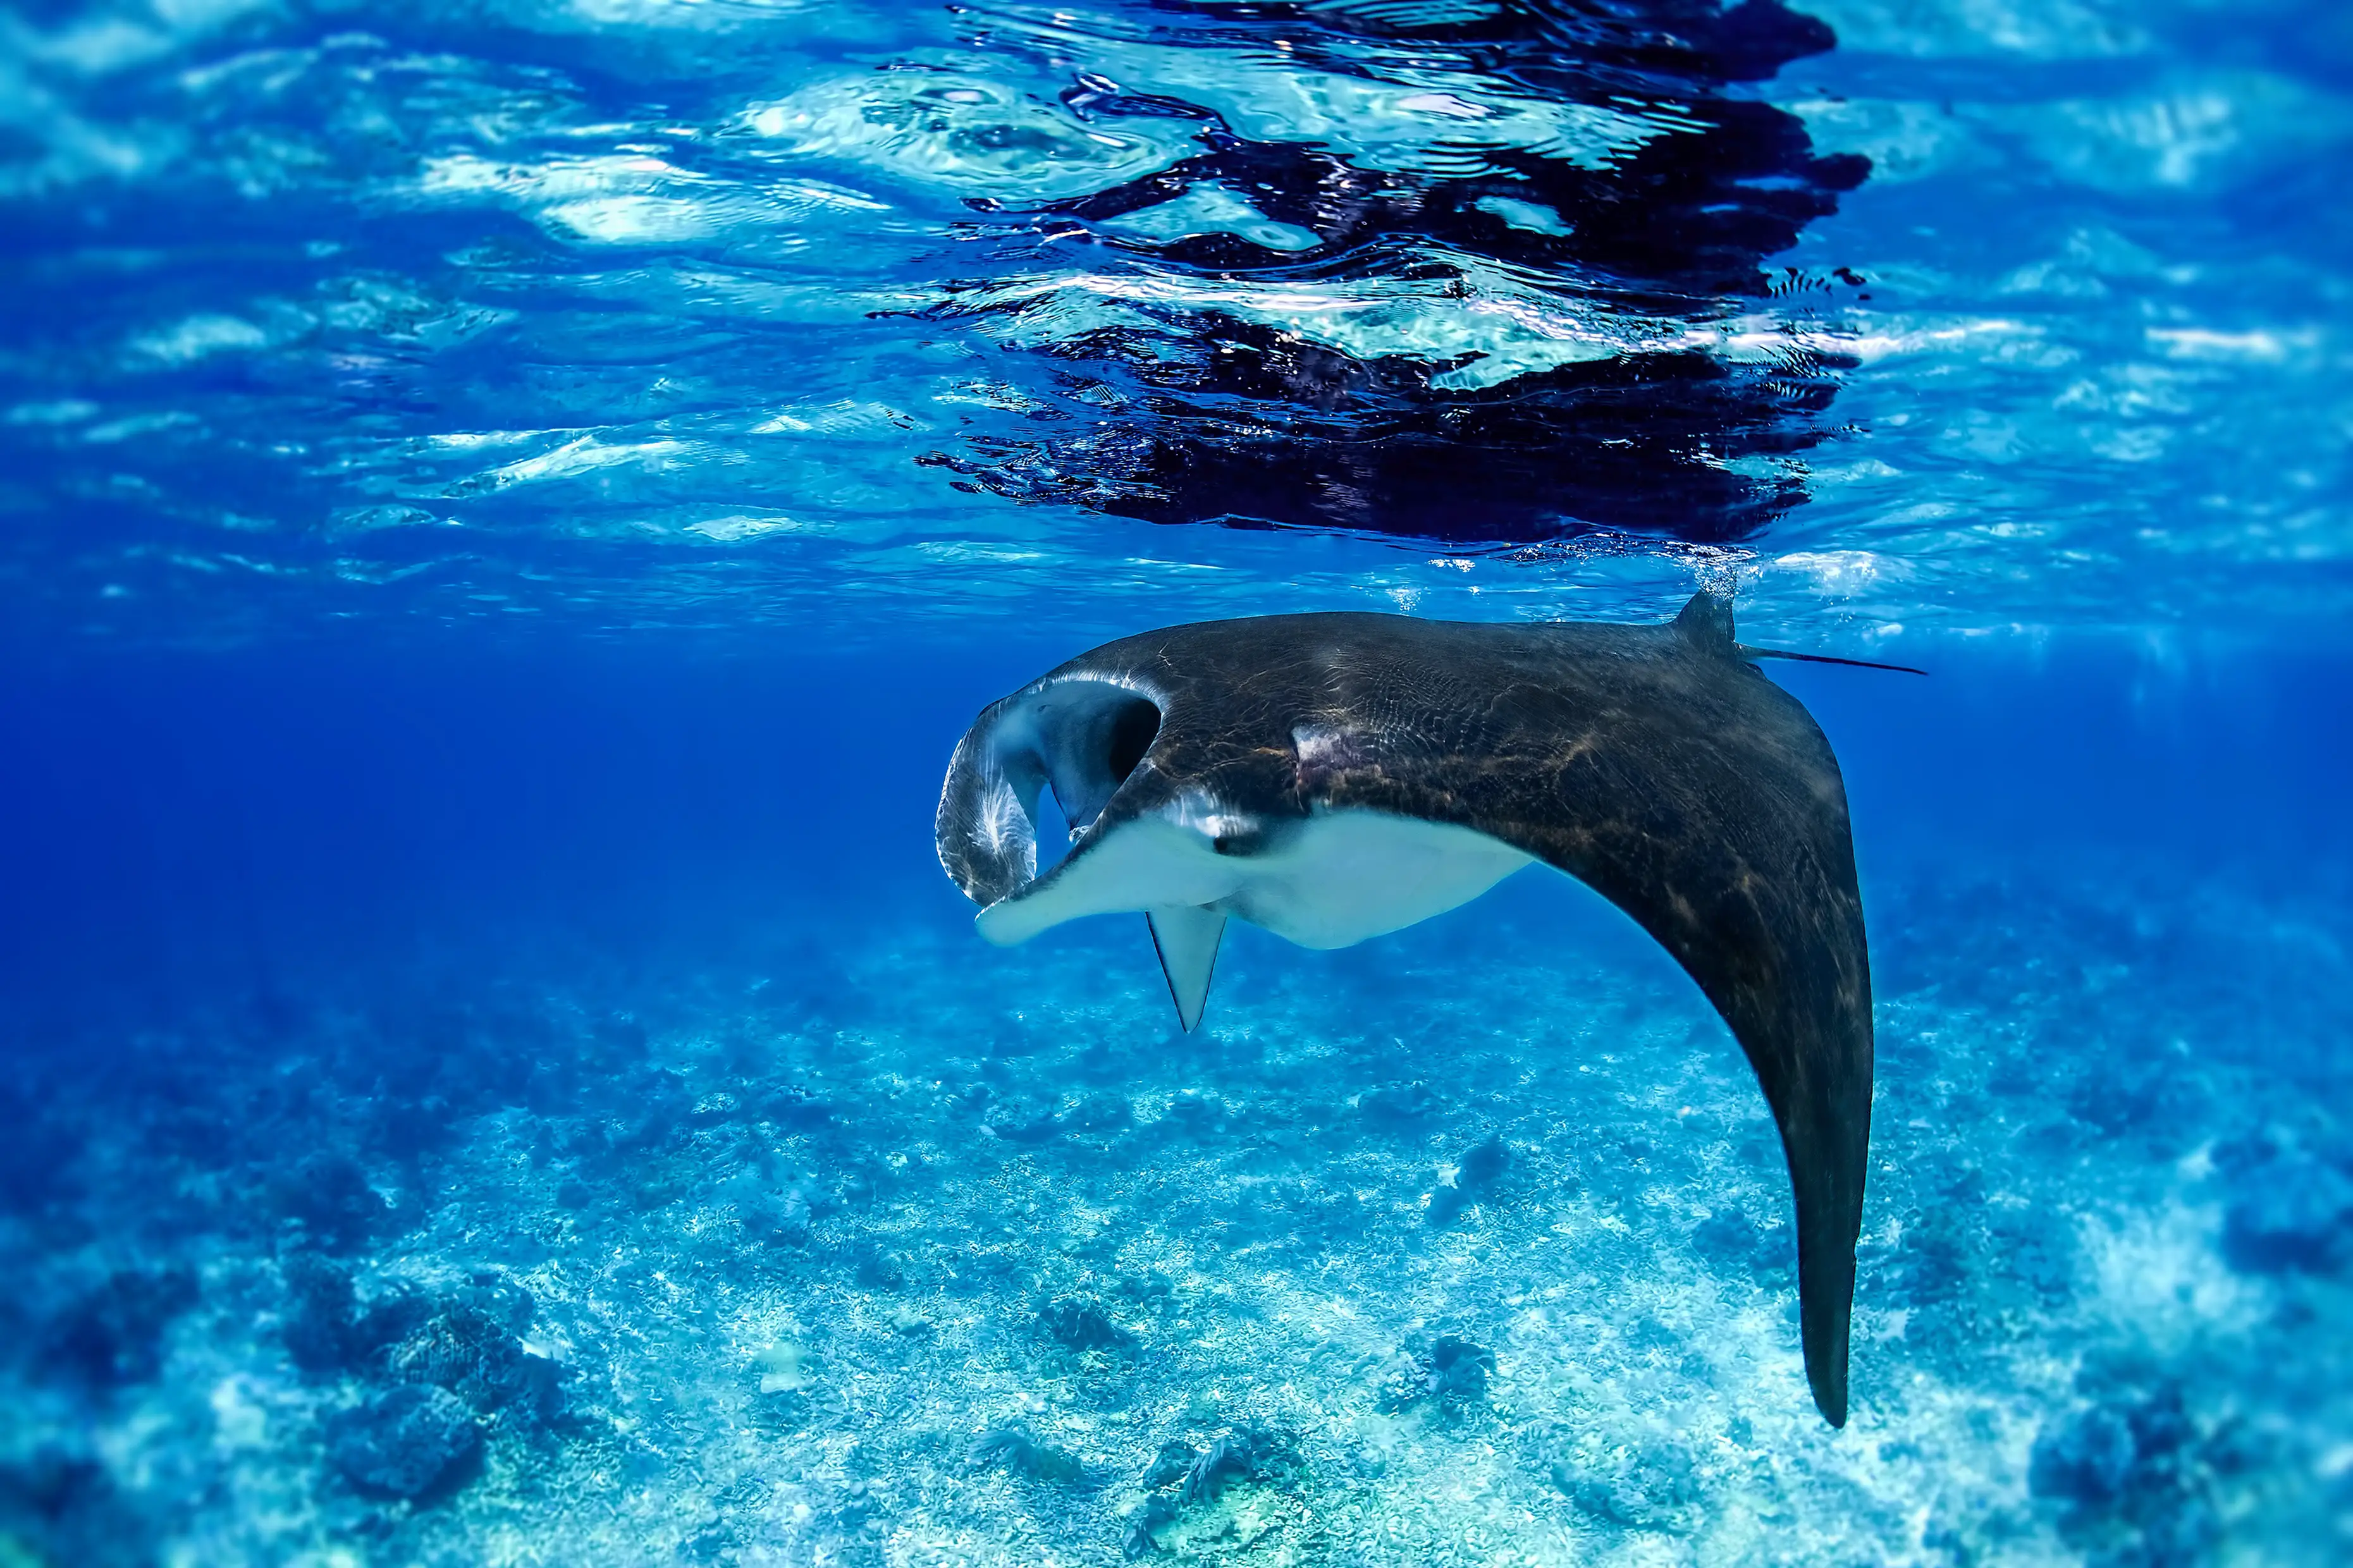 Ethical Travel: Snorkel with manta rays in a safe and sustainable way